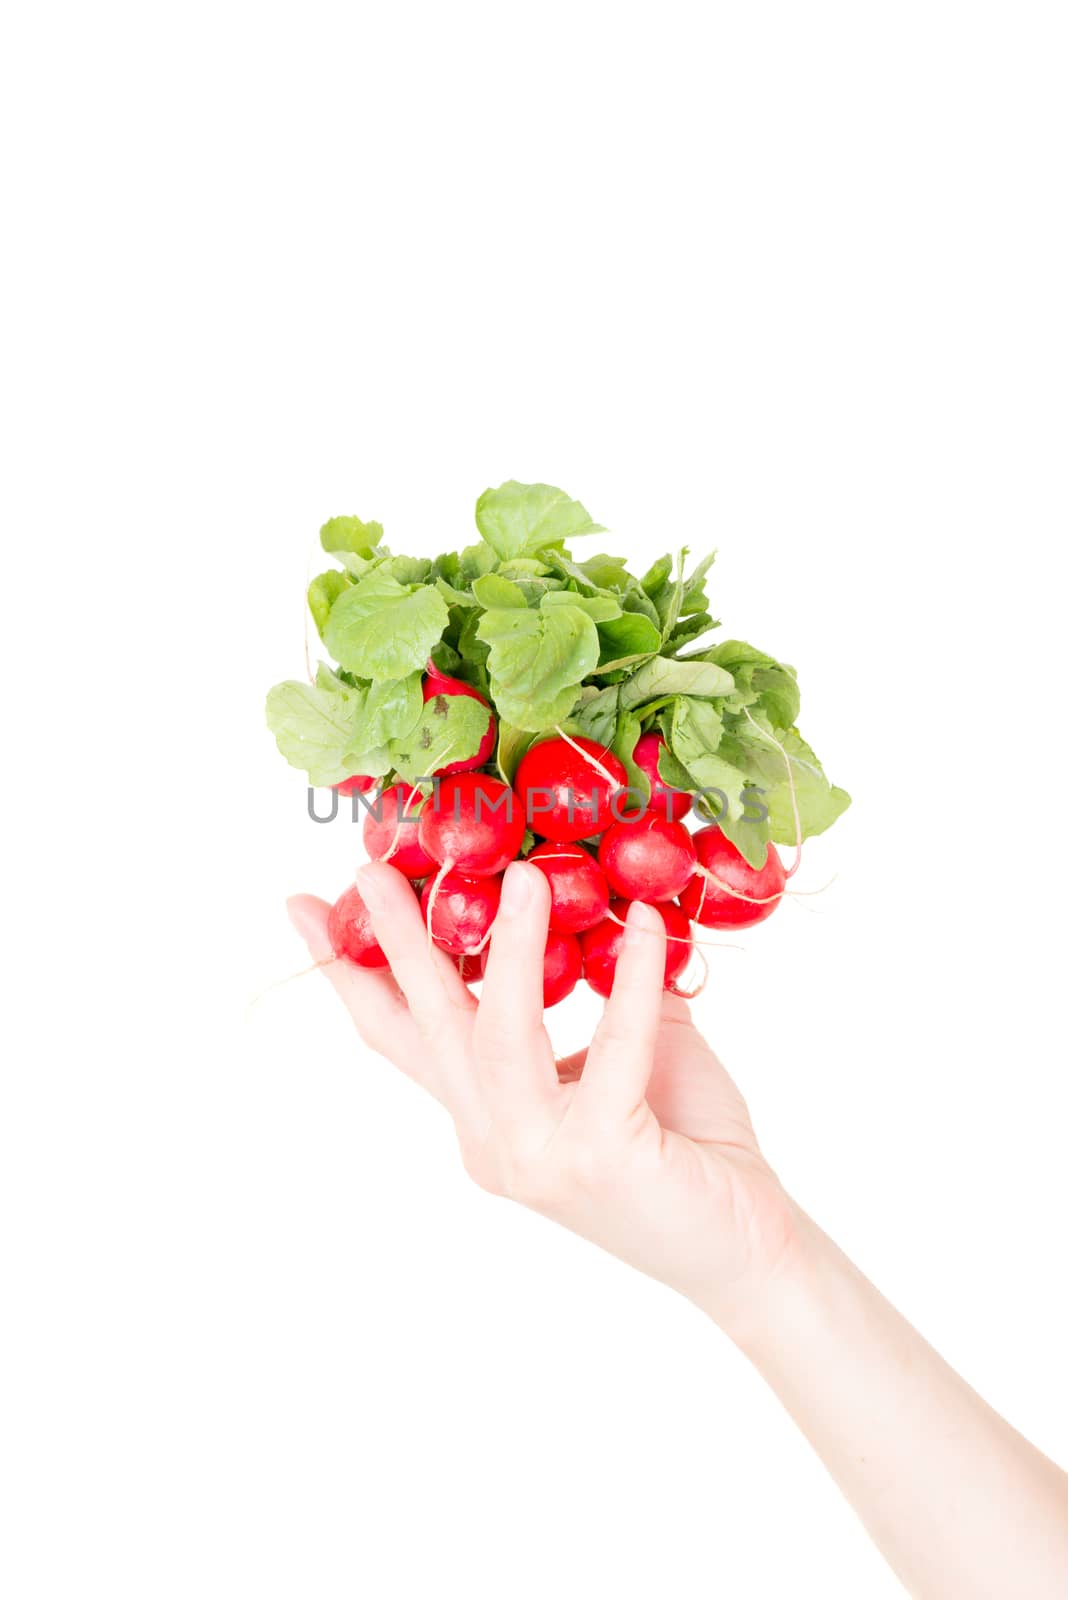 Red radish isolated on white background in human hand